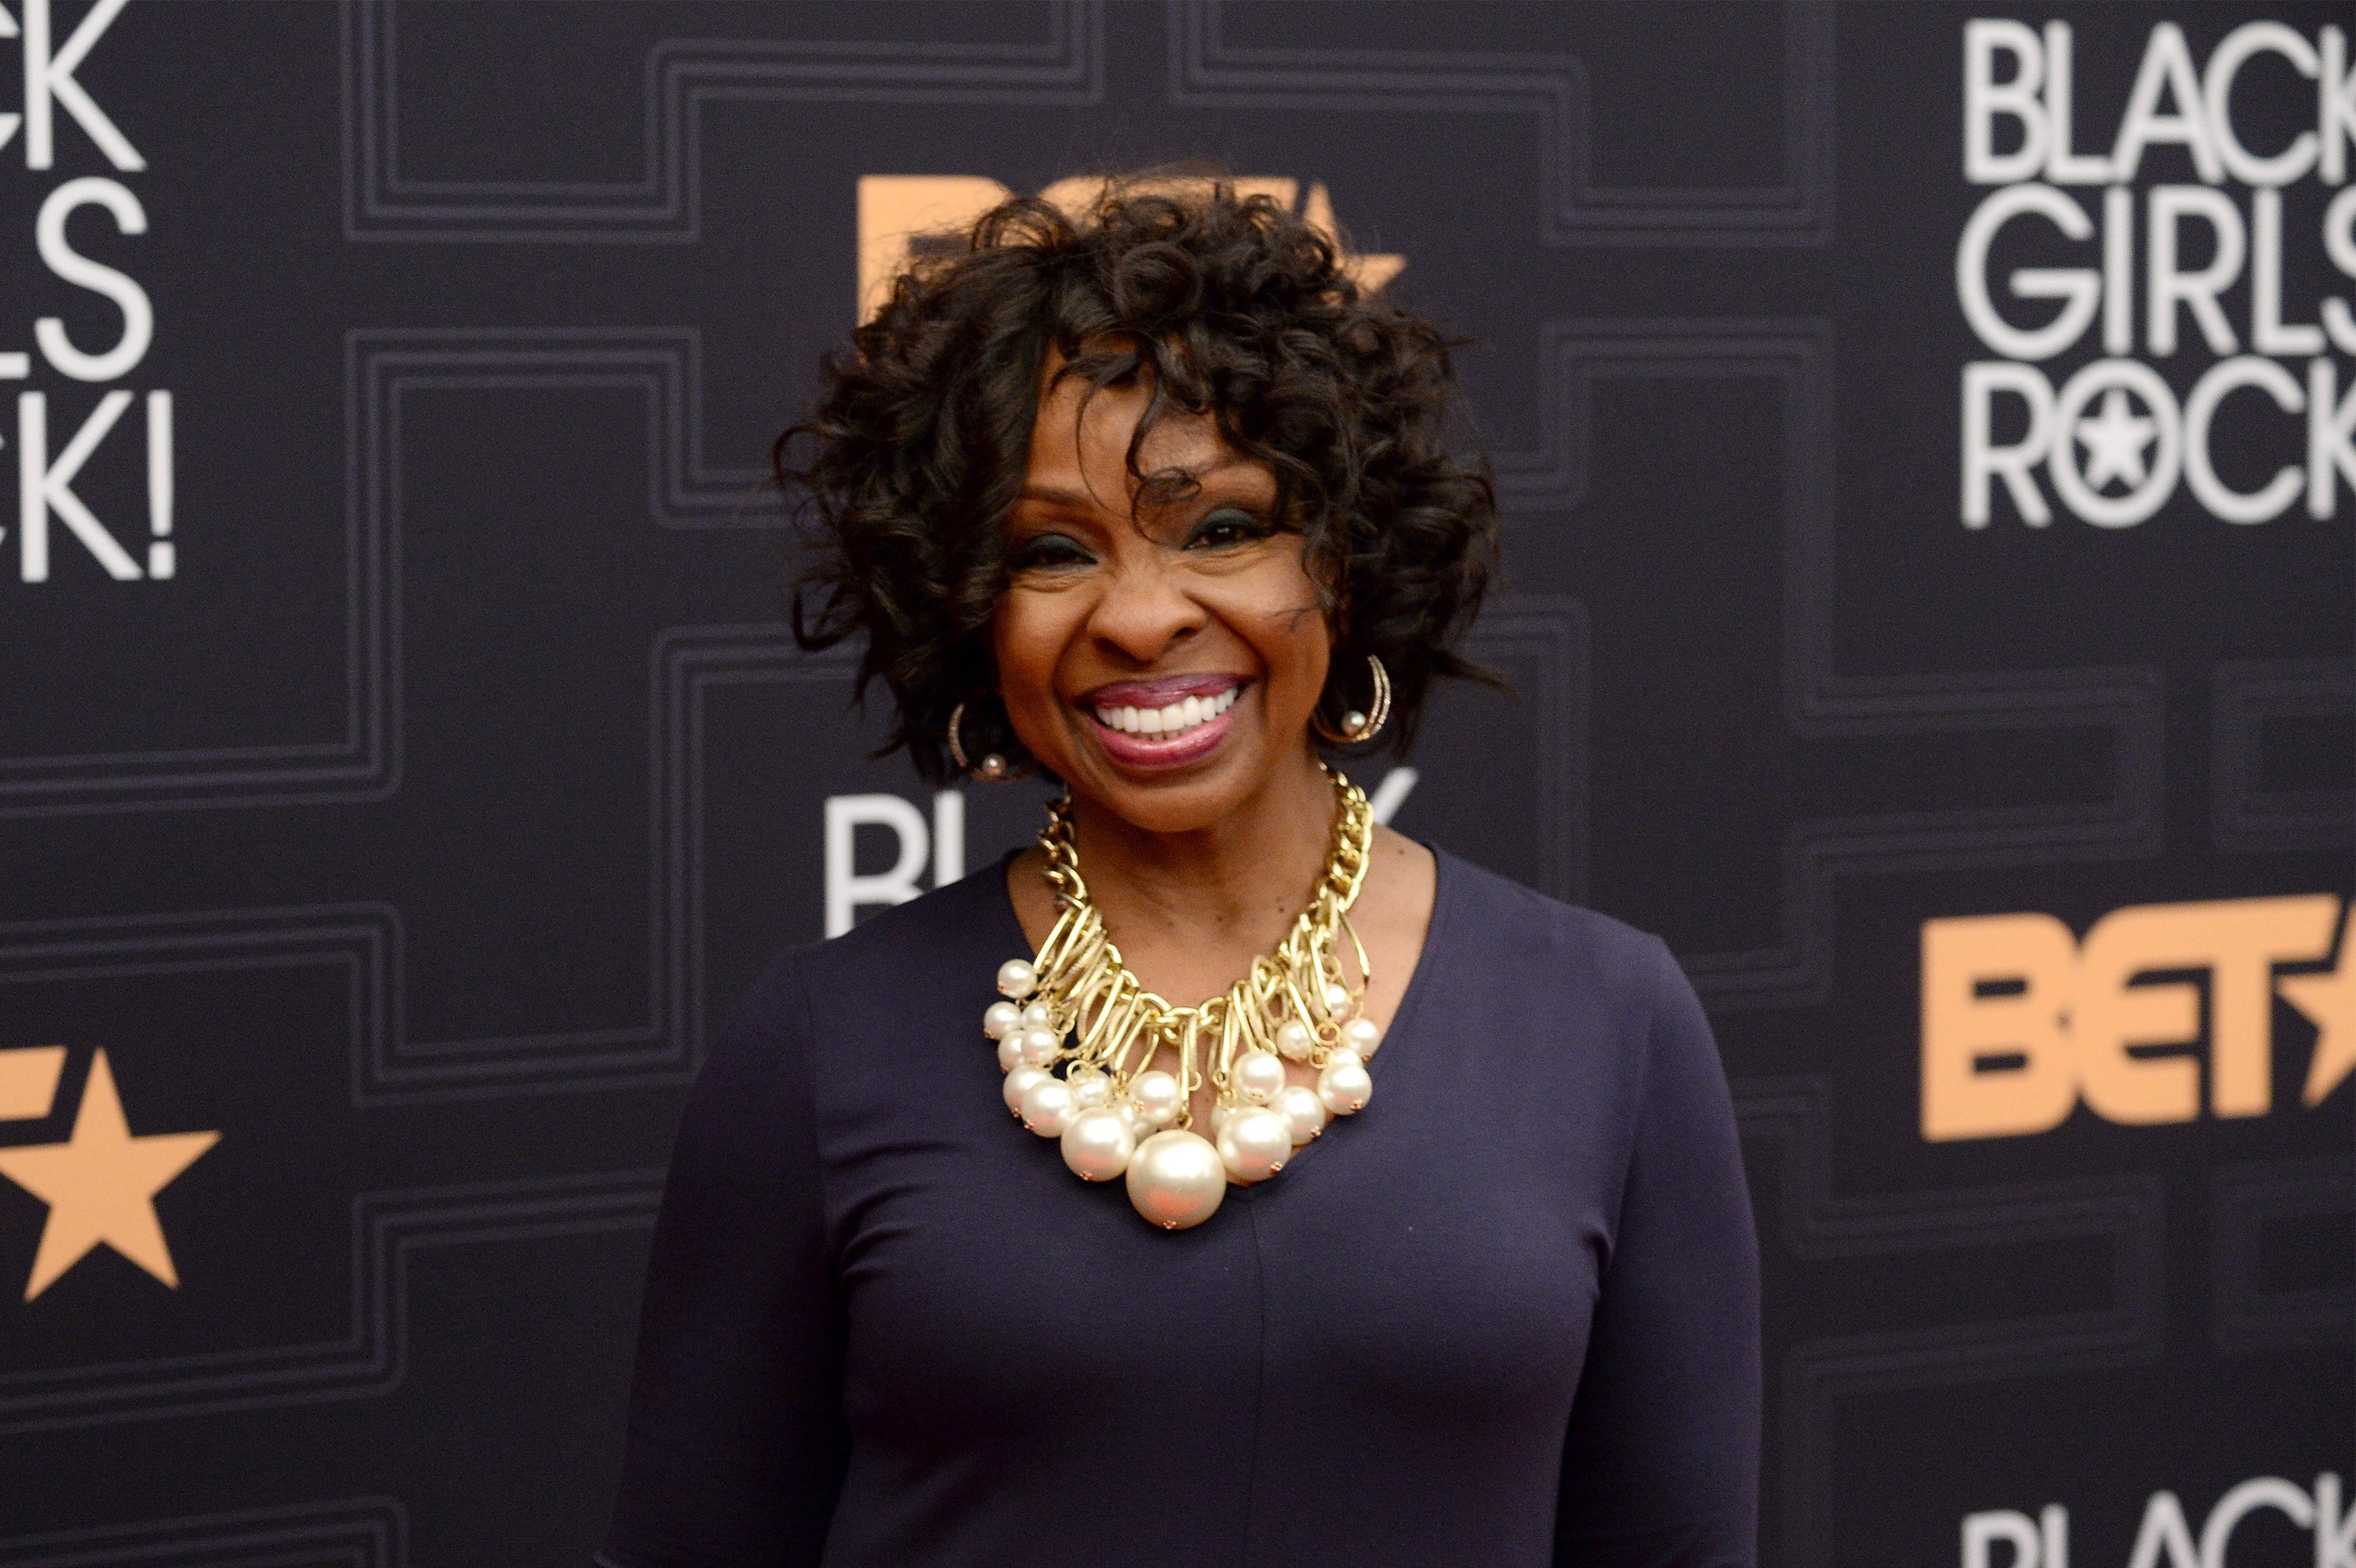 Singer Gladys Knight attends Black Girls Rock! 2016 on April 1, 2016 in New York City. | Source: Getty Images